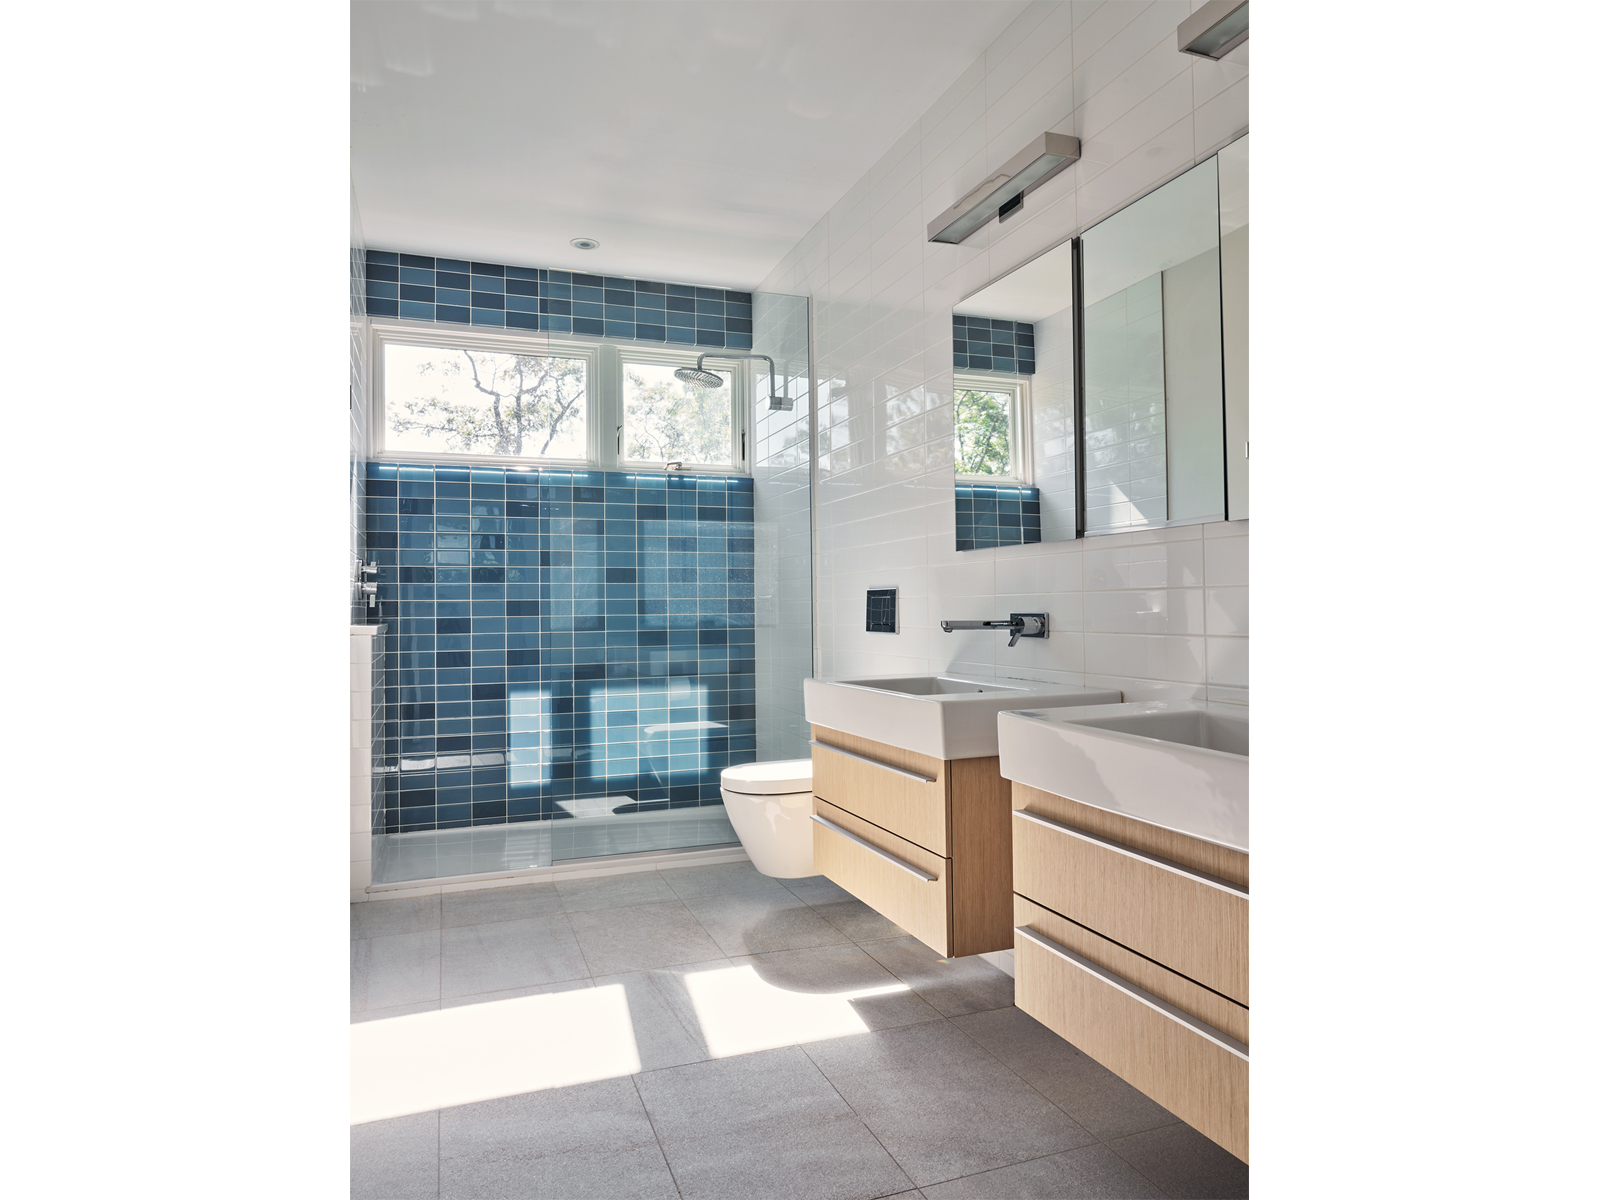 view of interior bathroom with two sinks and shower enclosure Ocean View House, Charlestown Rhode Island, Sarah Jefferys Architecture + Design